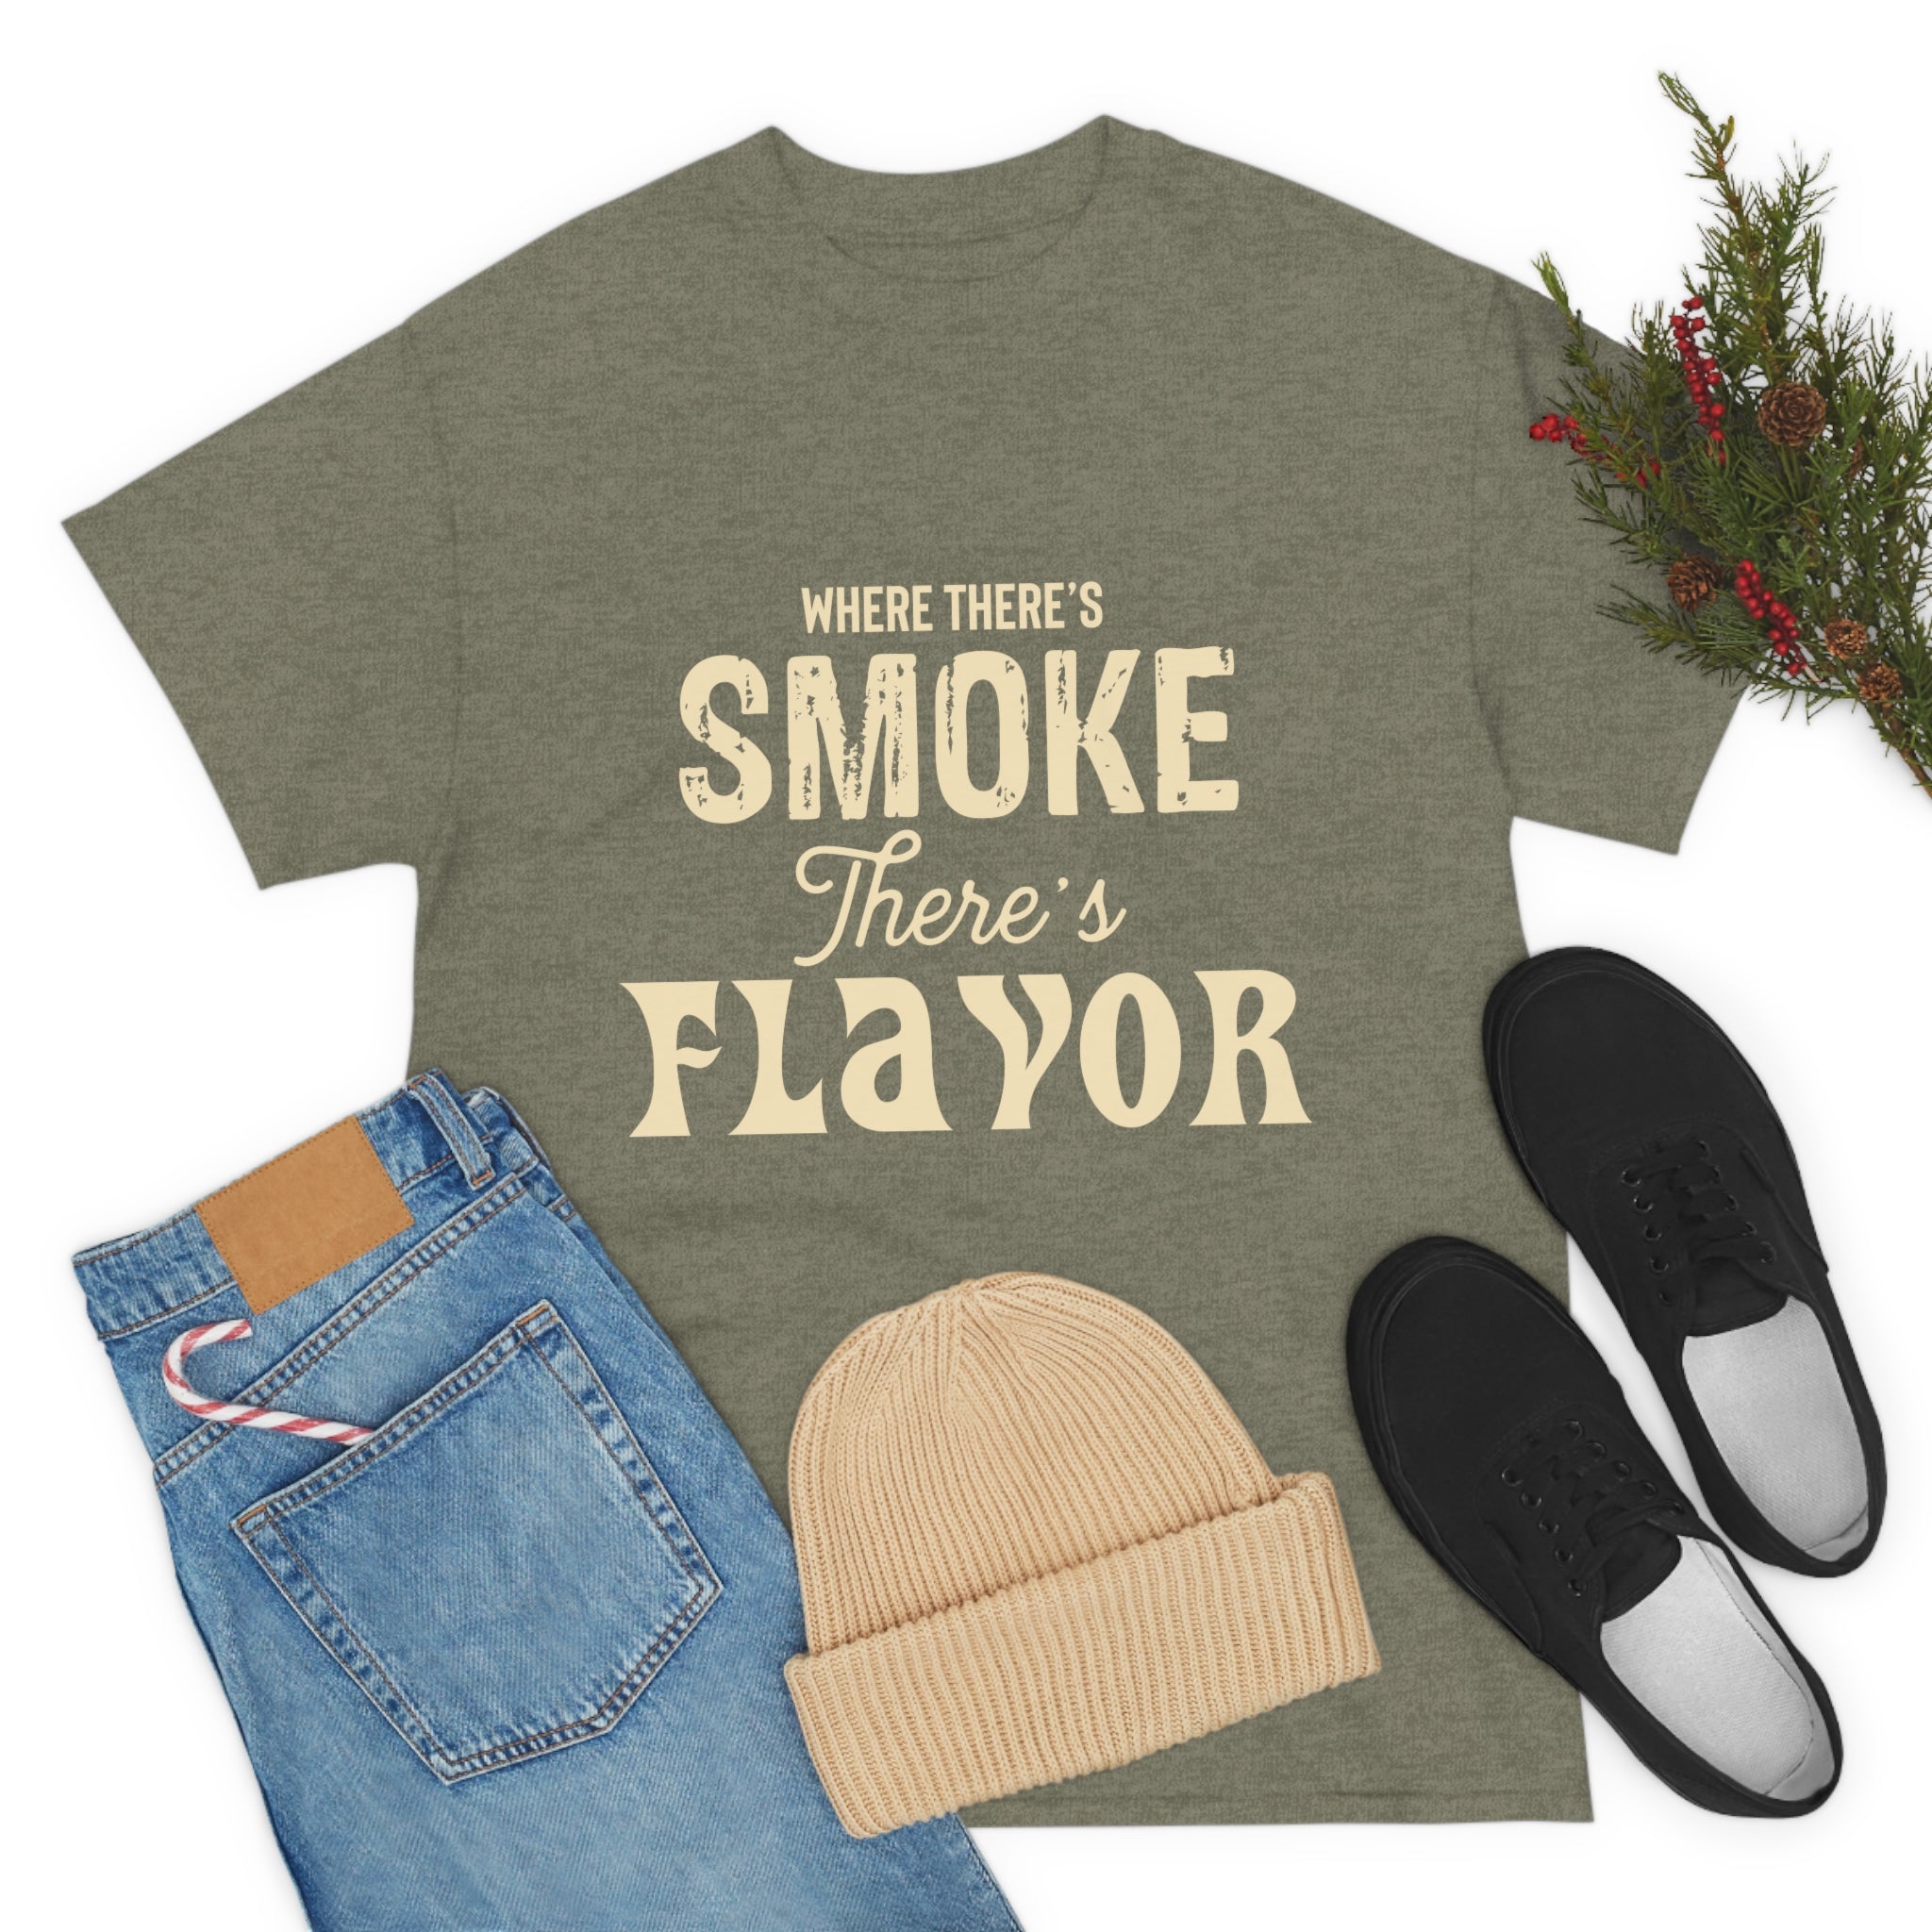 Where There's Smoke There's Flavour shirt